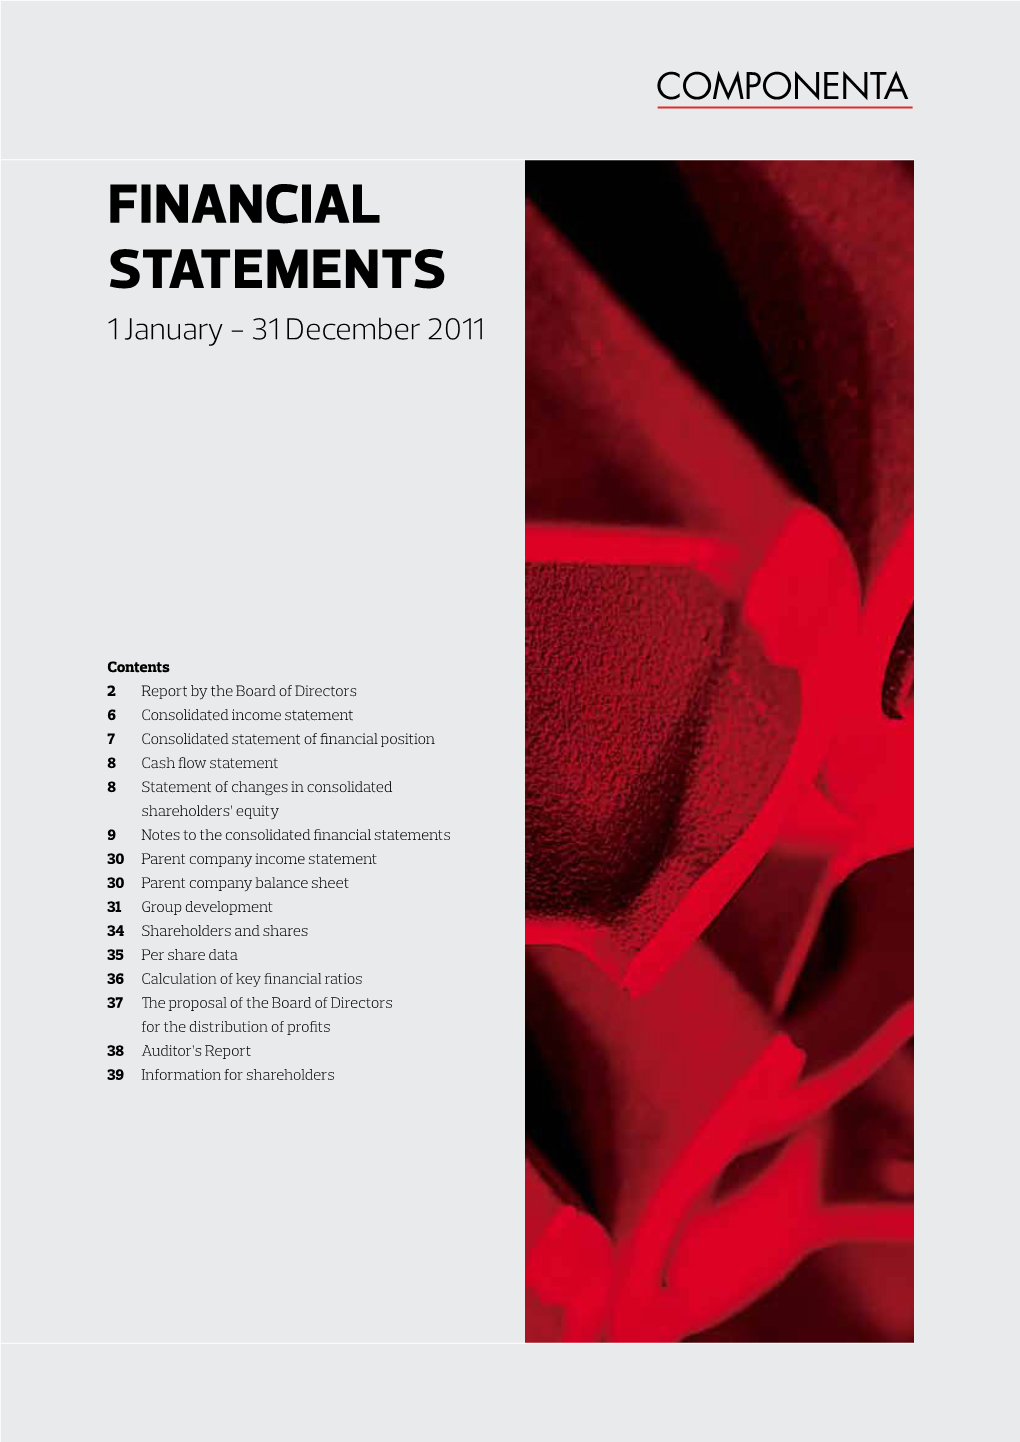 Financial Statements 1 January - 31 December 2011